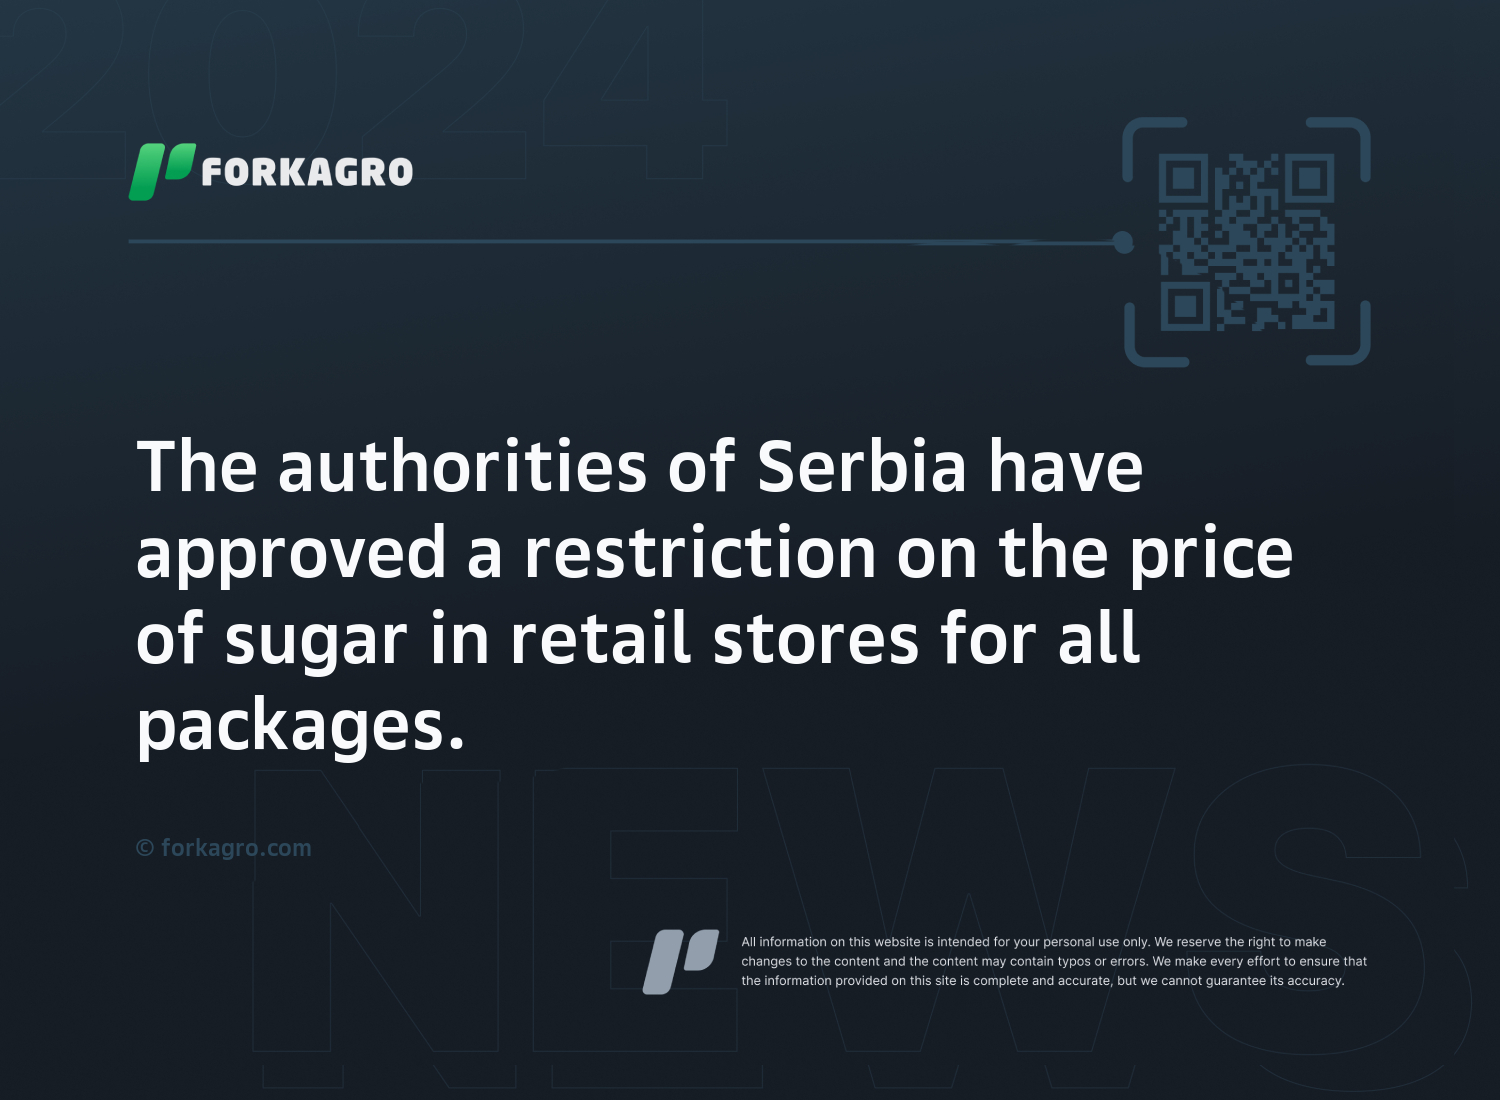 The authorities of Serbia have approved a restriction on the price of sugar in retail stores for all packages.